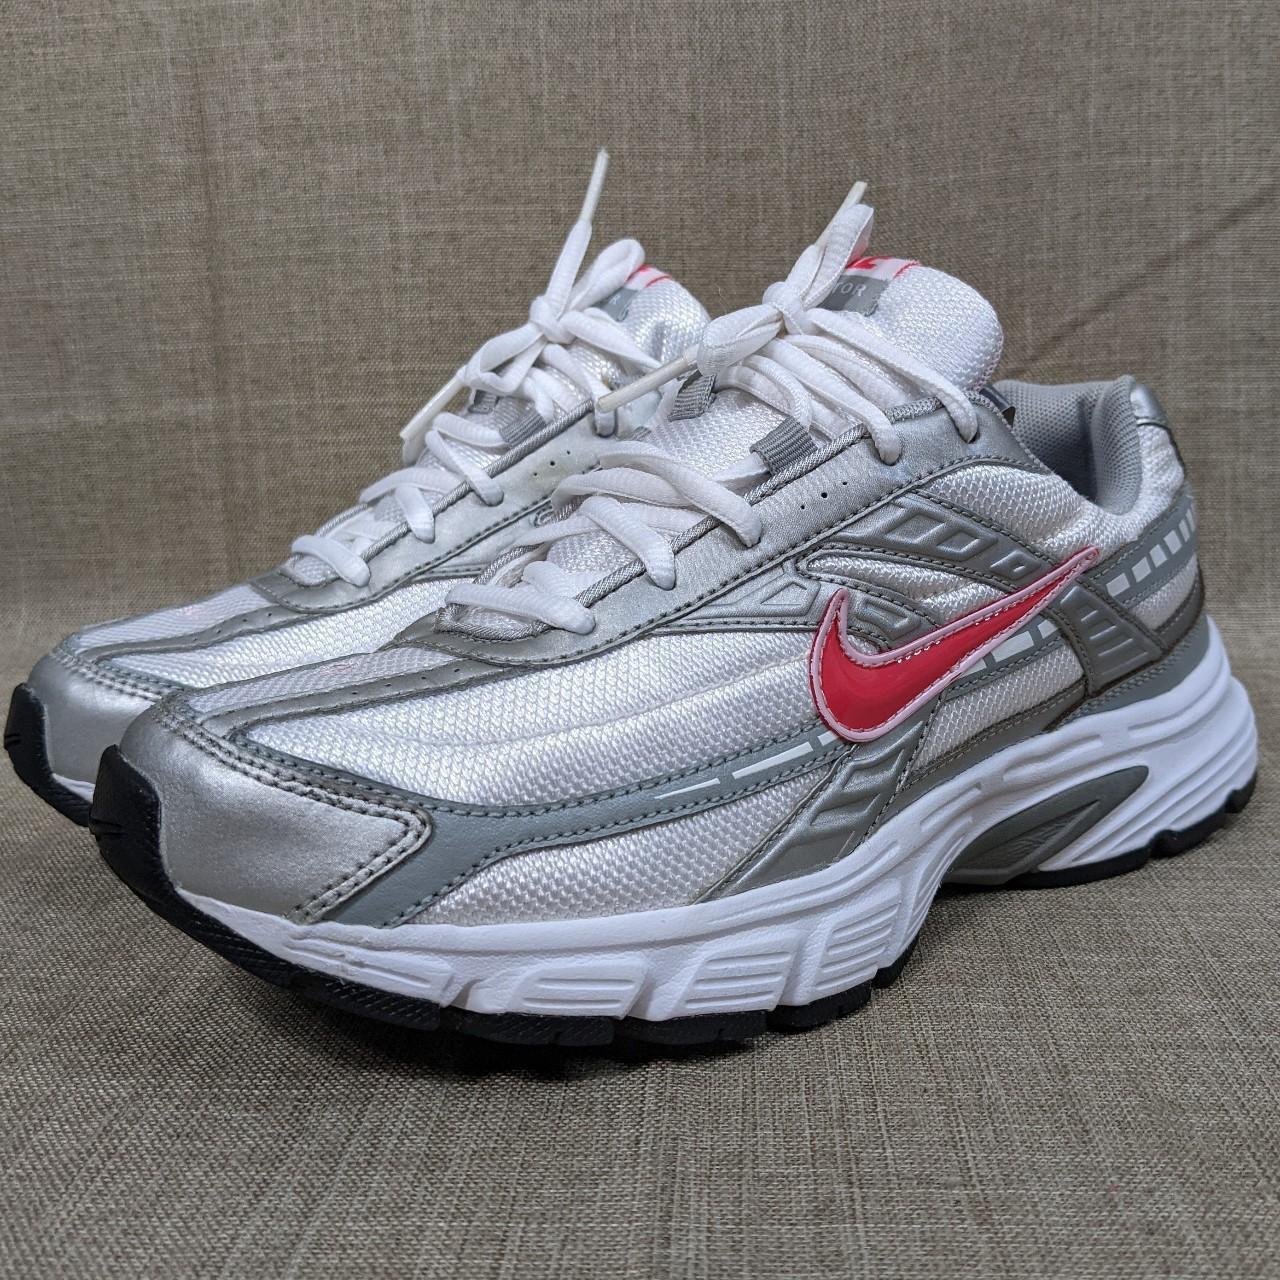 Product Image 3 - Nike women's chunky dad sneakers.

Women's